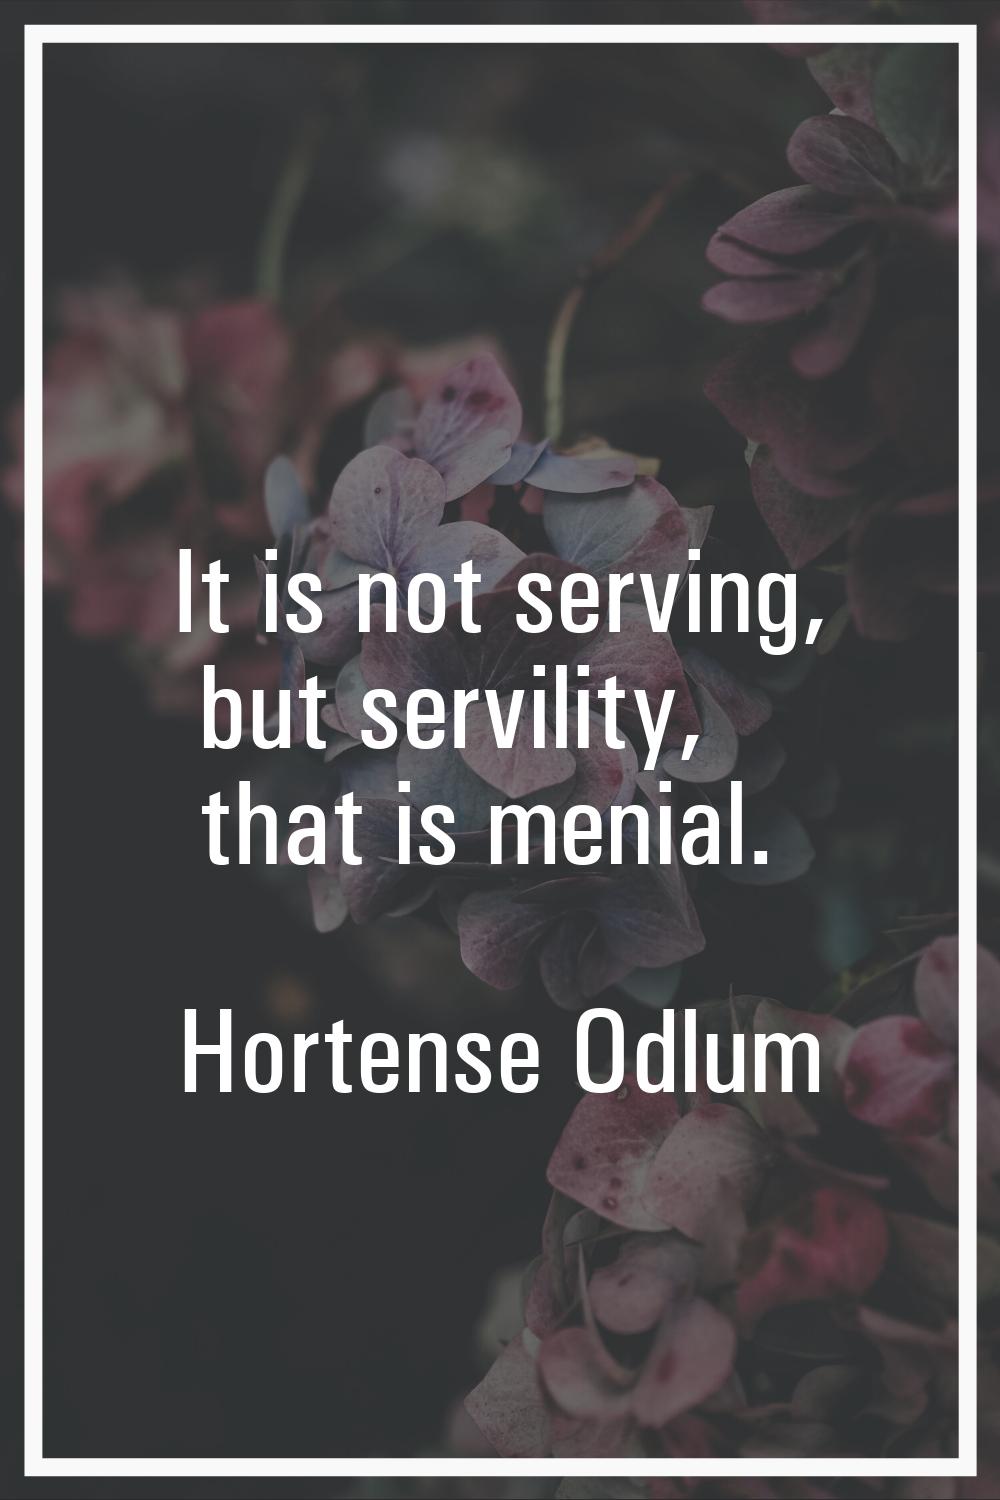 It is not serving, but servility, that is menial.